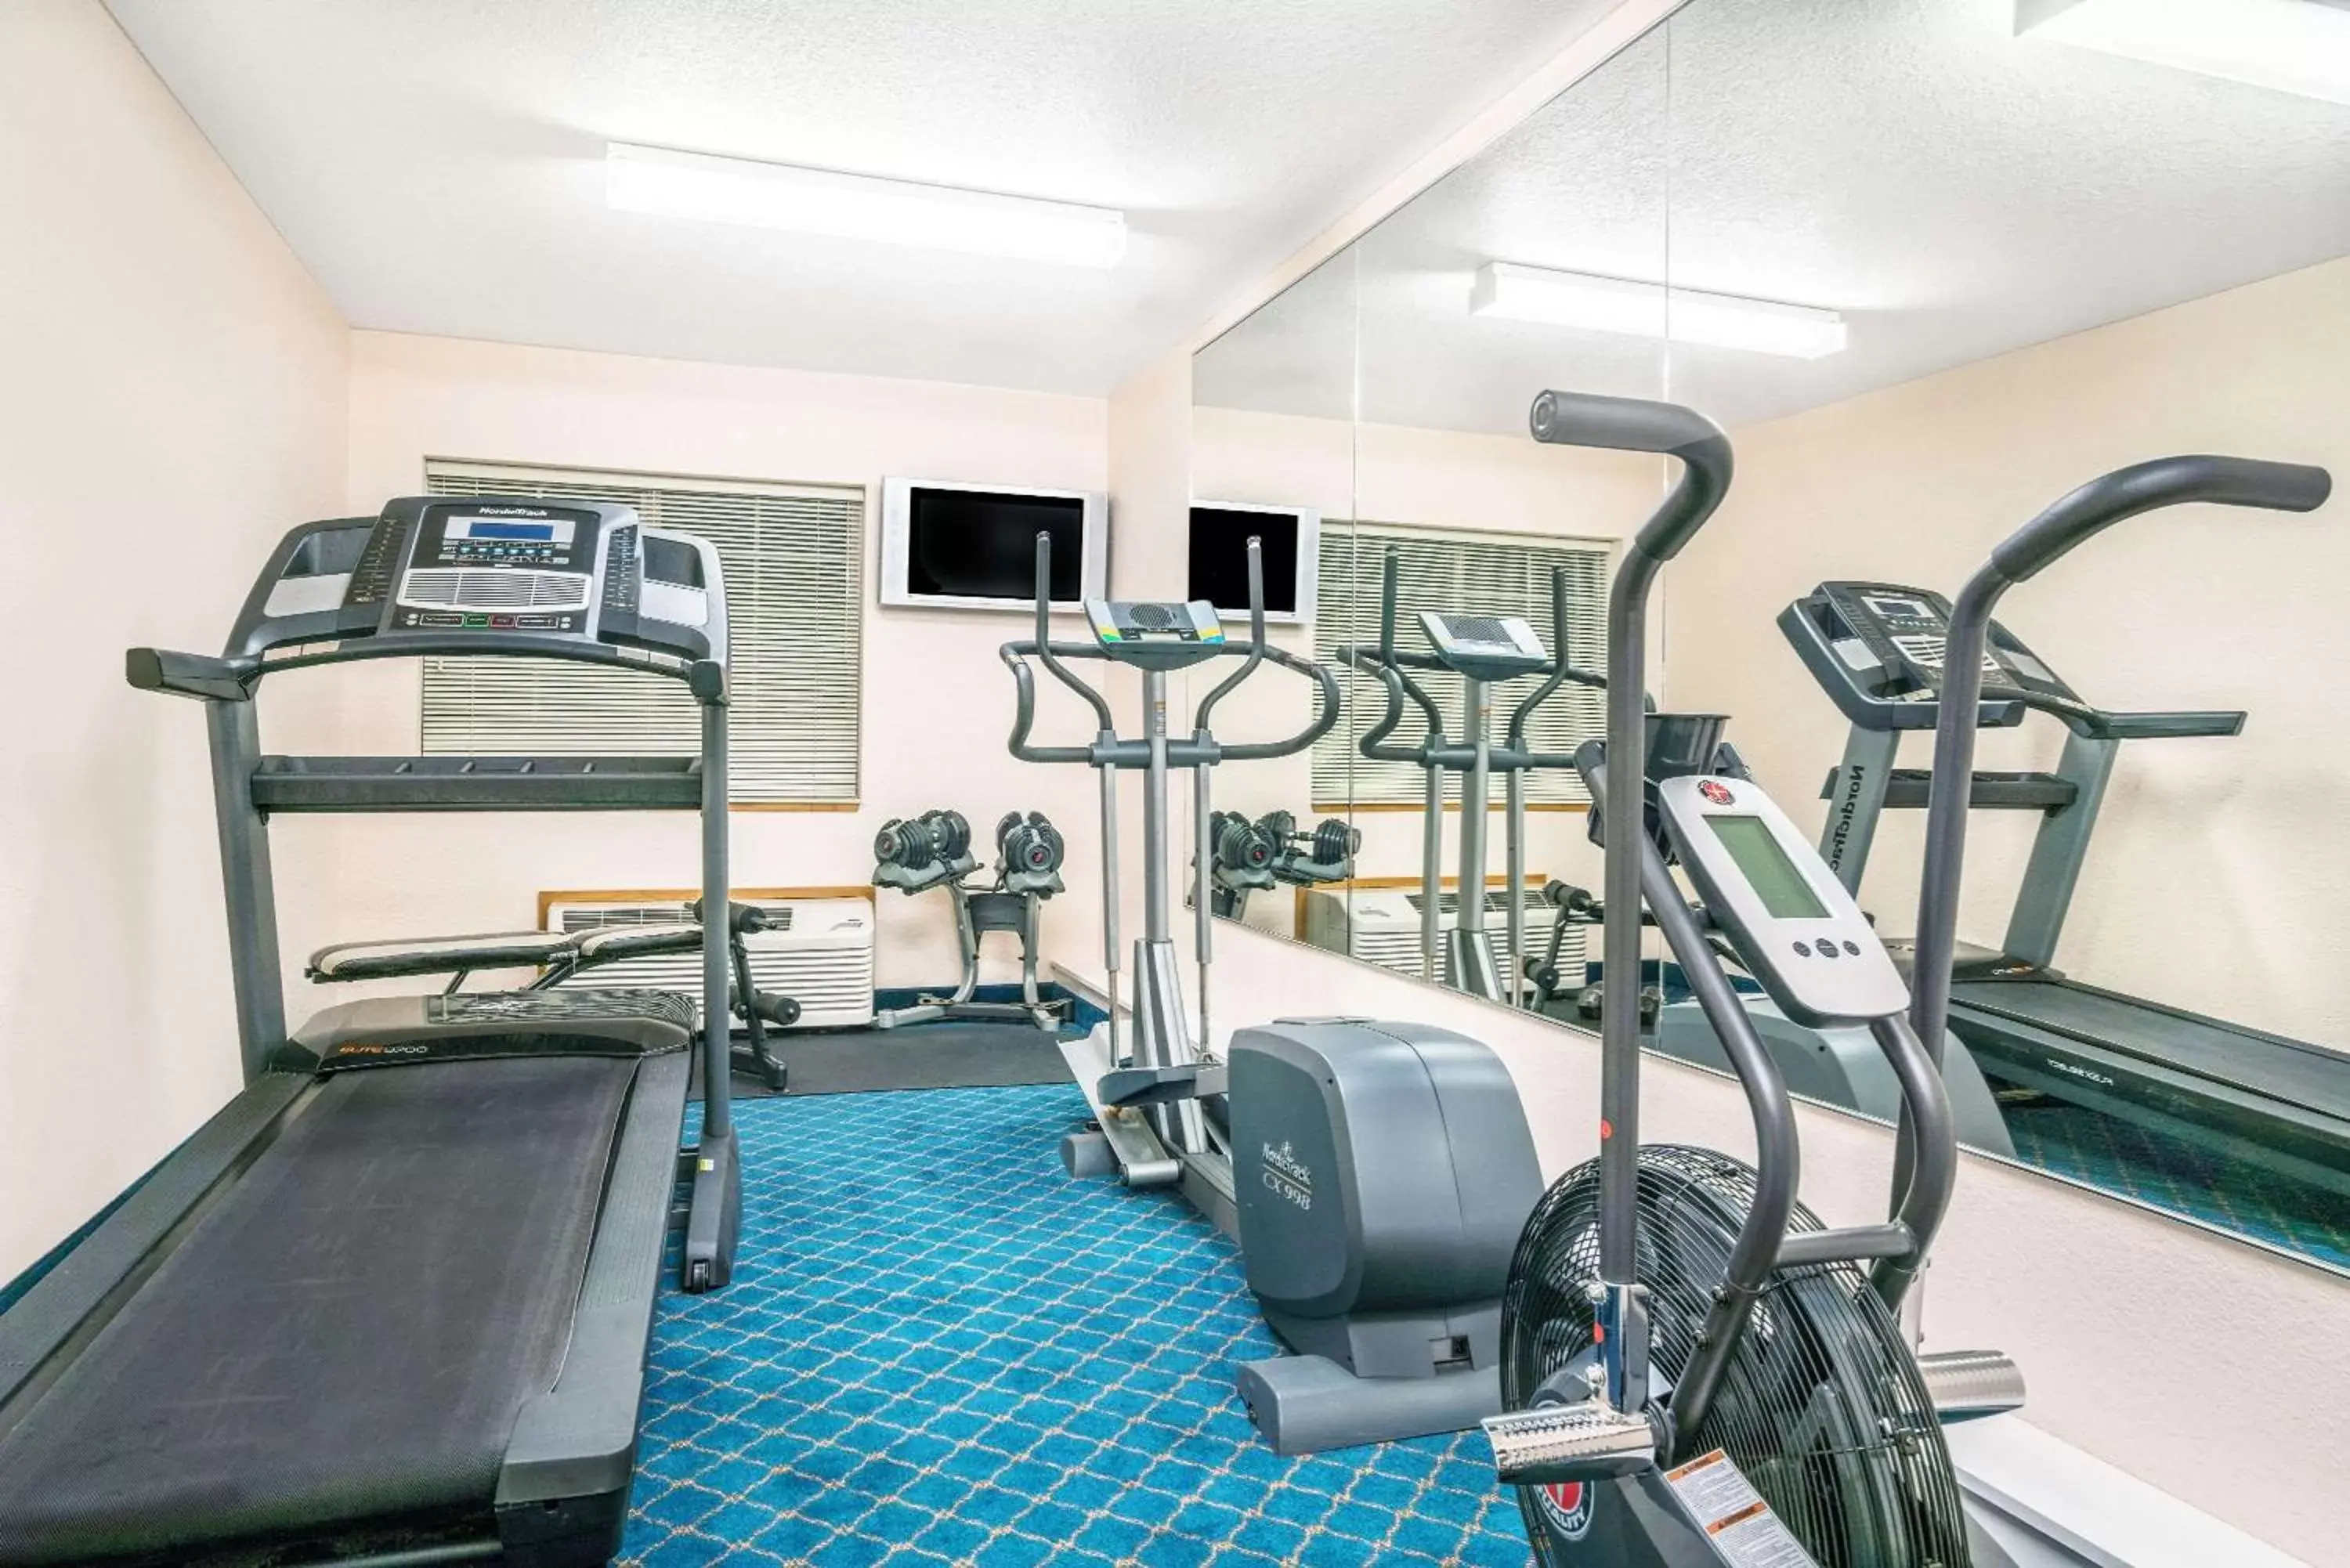 Fitness centre/facilities, Fitness Center/Facilities in Microtel Inn & Suites Tomah